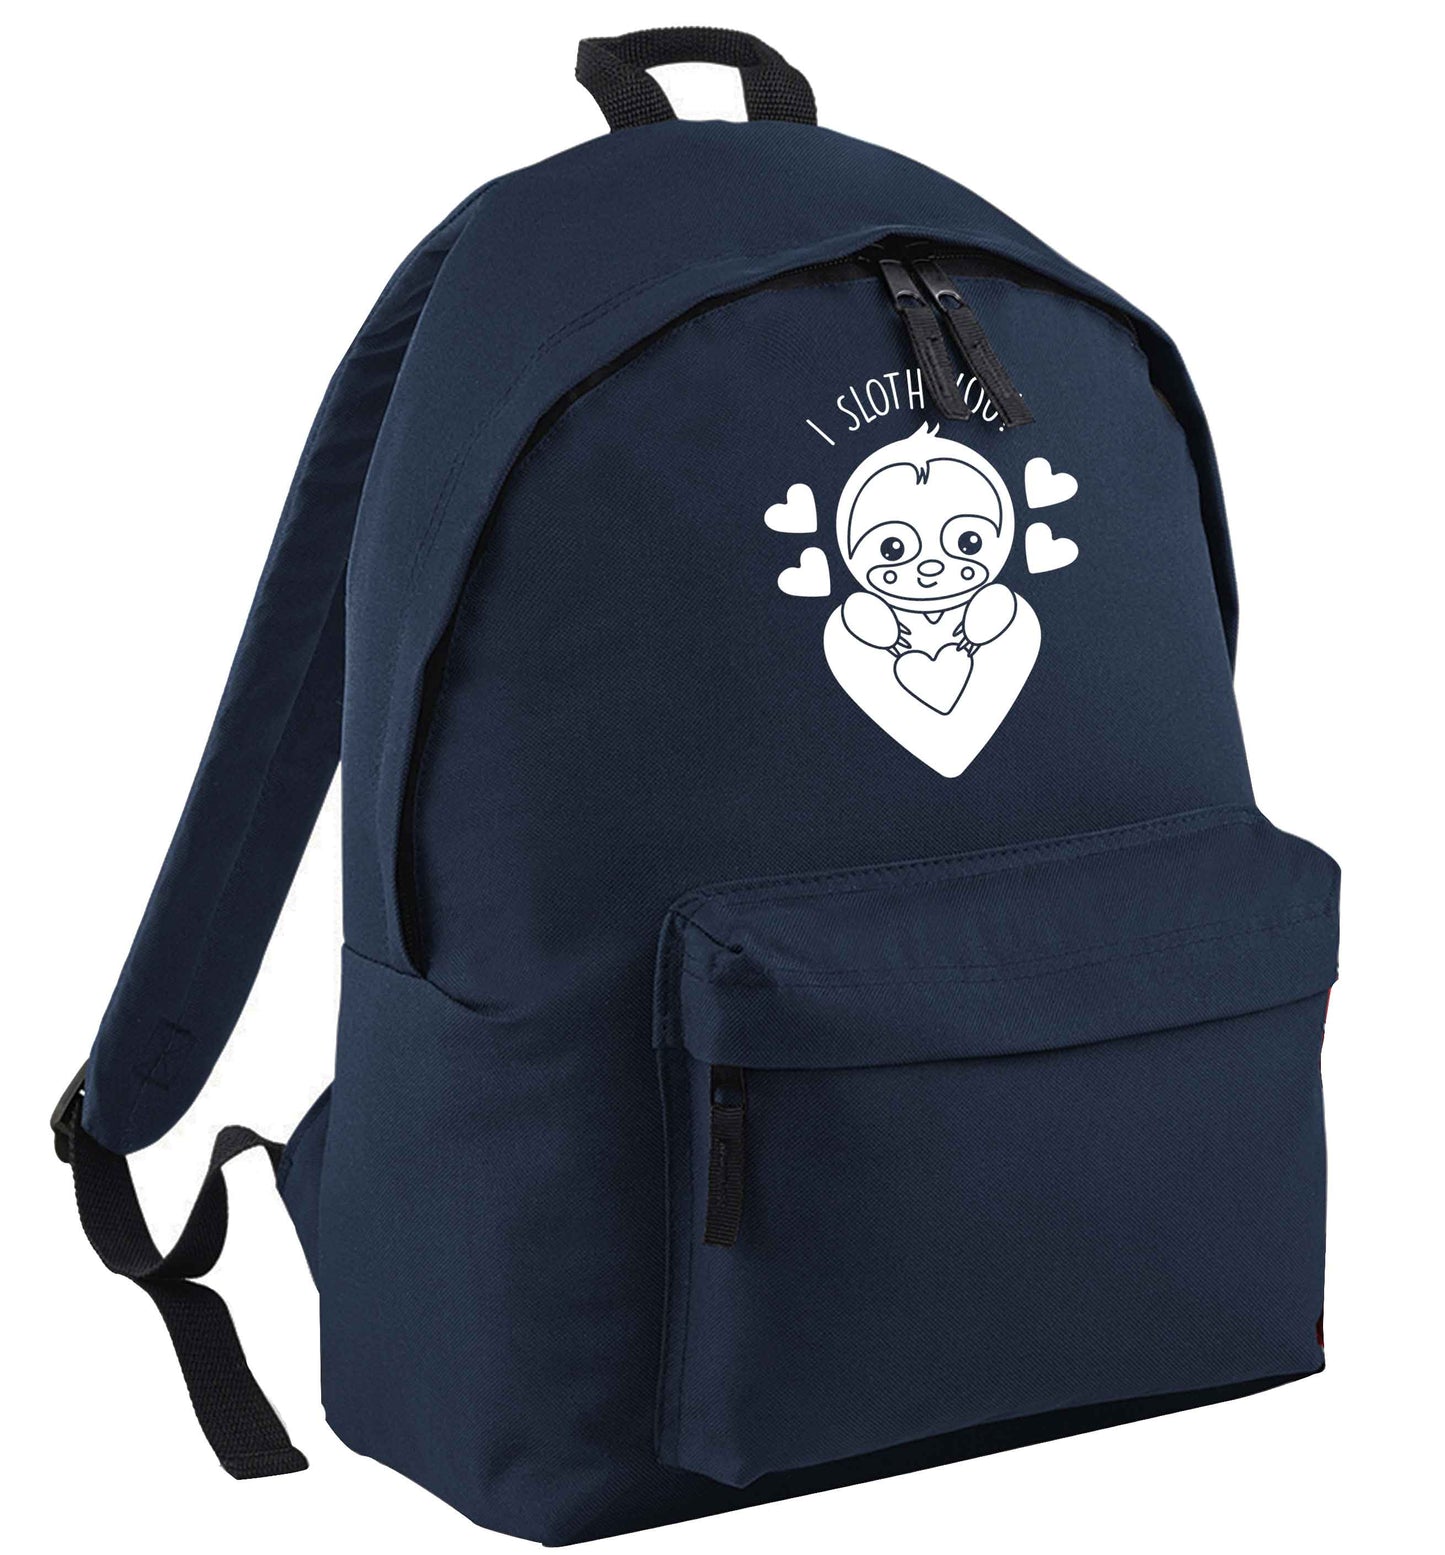 I sloth you navy adults backpack